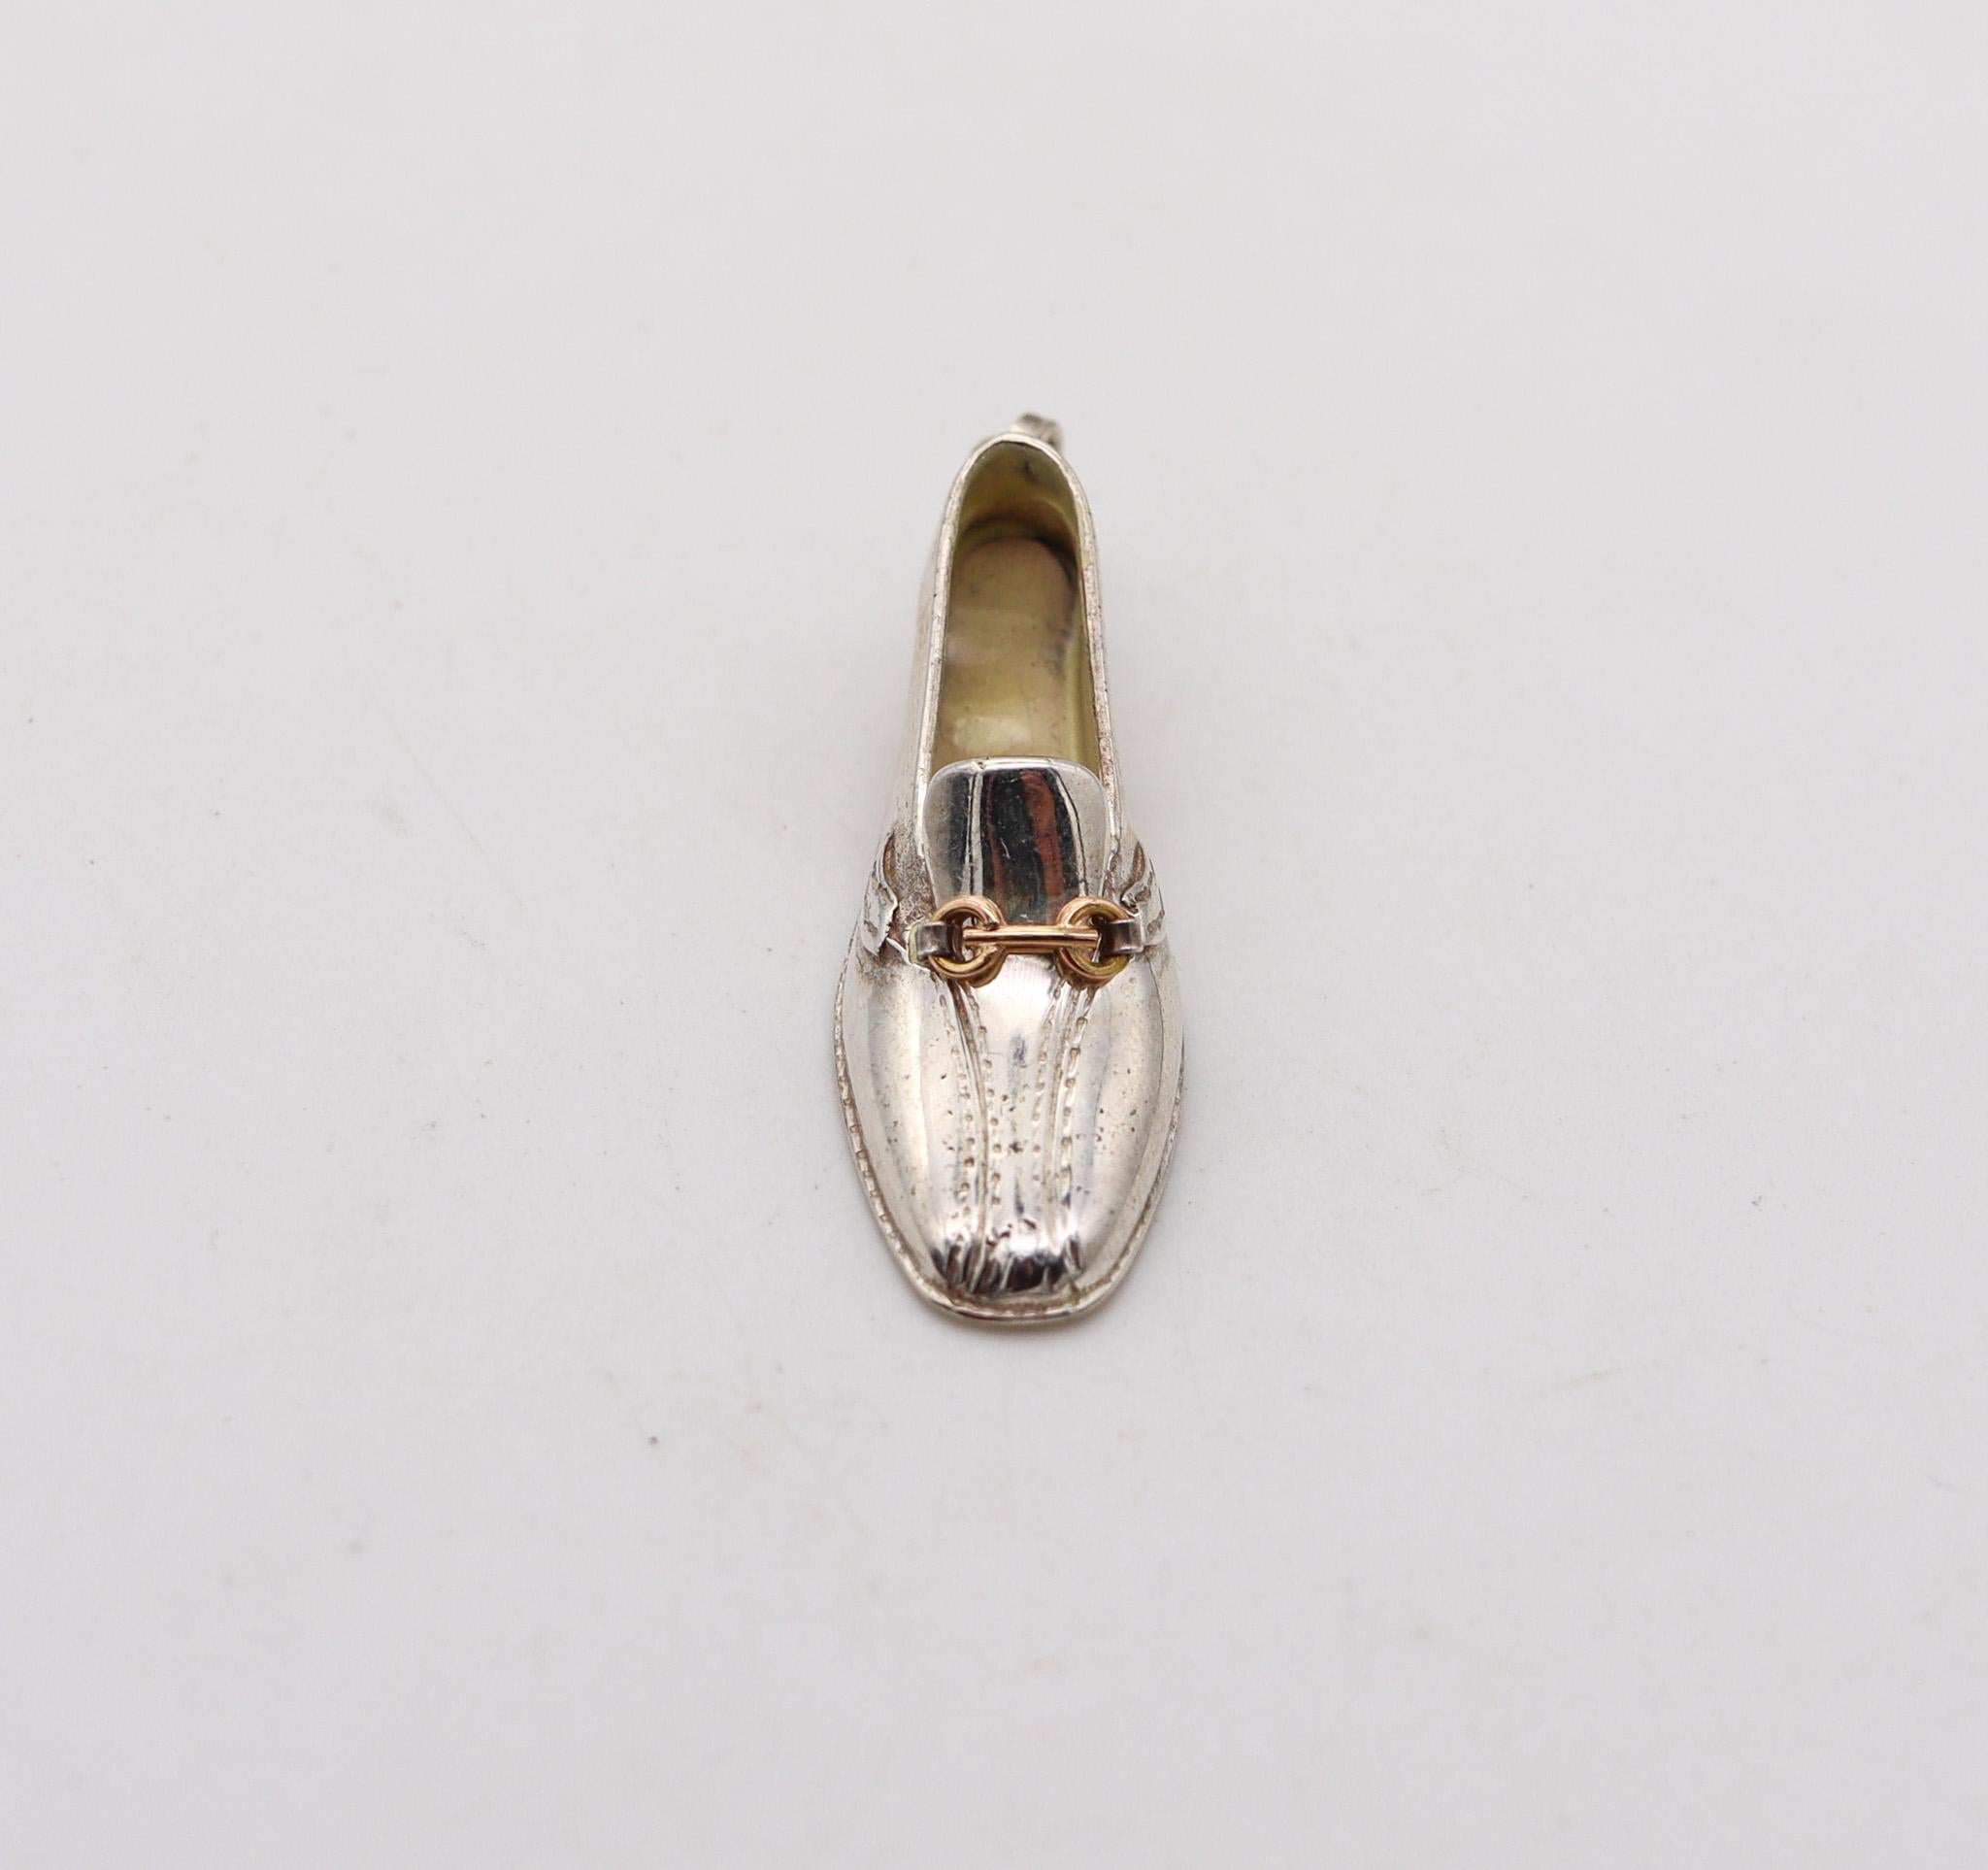 Modernist Gucci 1980 Firenze Shoe With Heels Pendant Charm In .925 Sterling 18Kt Gold For Sale